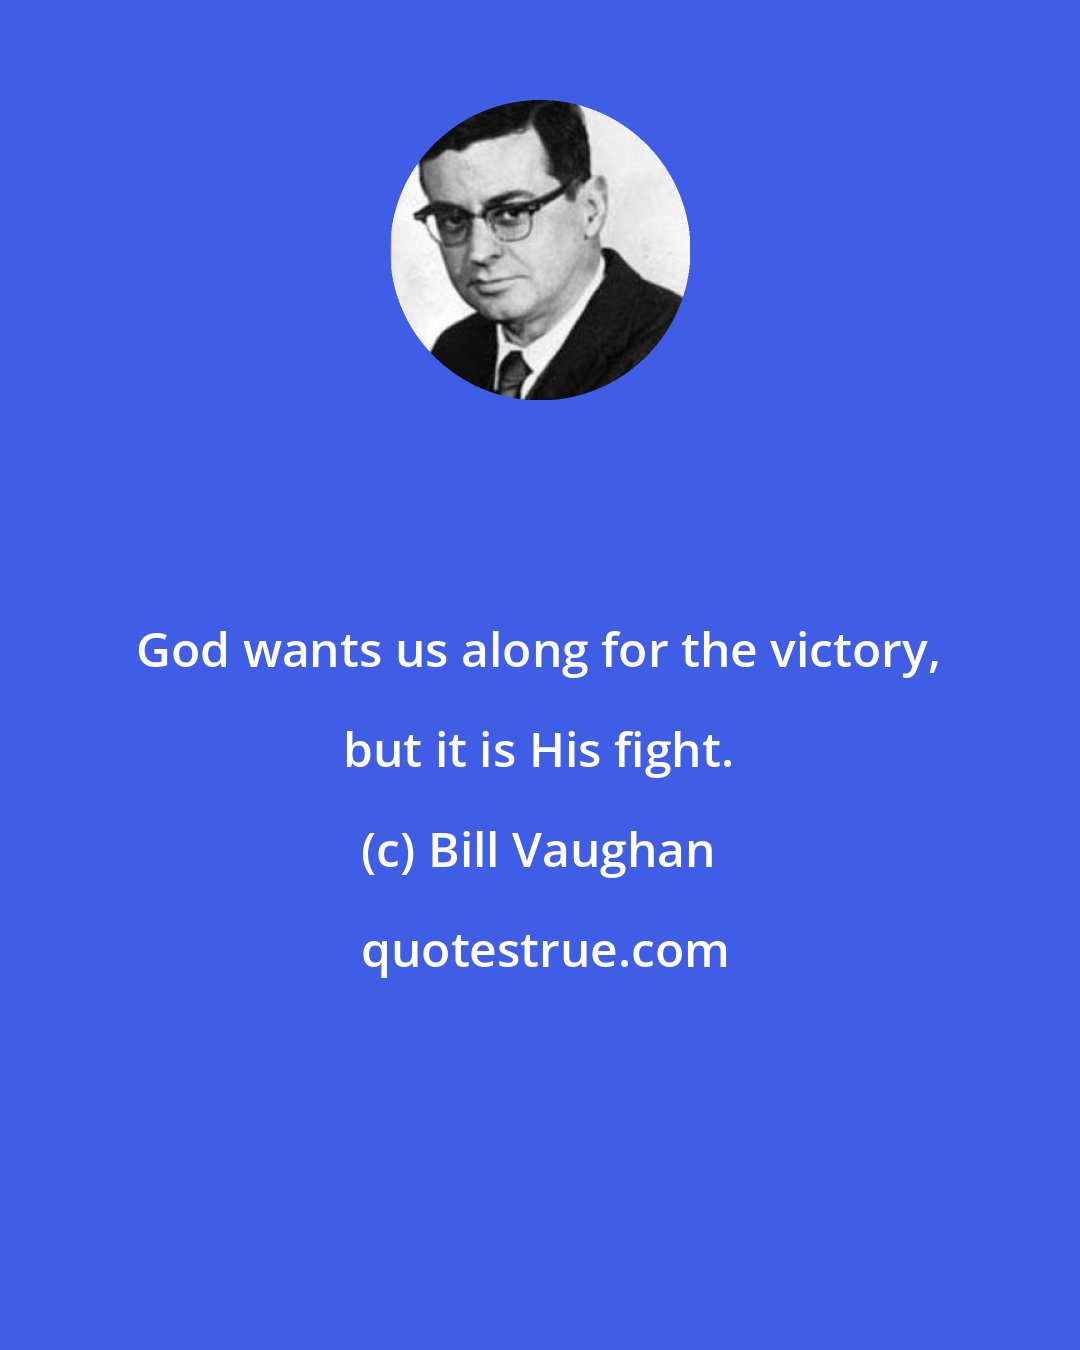 Bill Vaughan: God wants us along for the victory, but it is His fight.